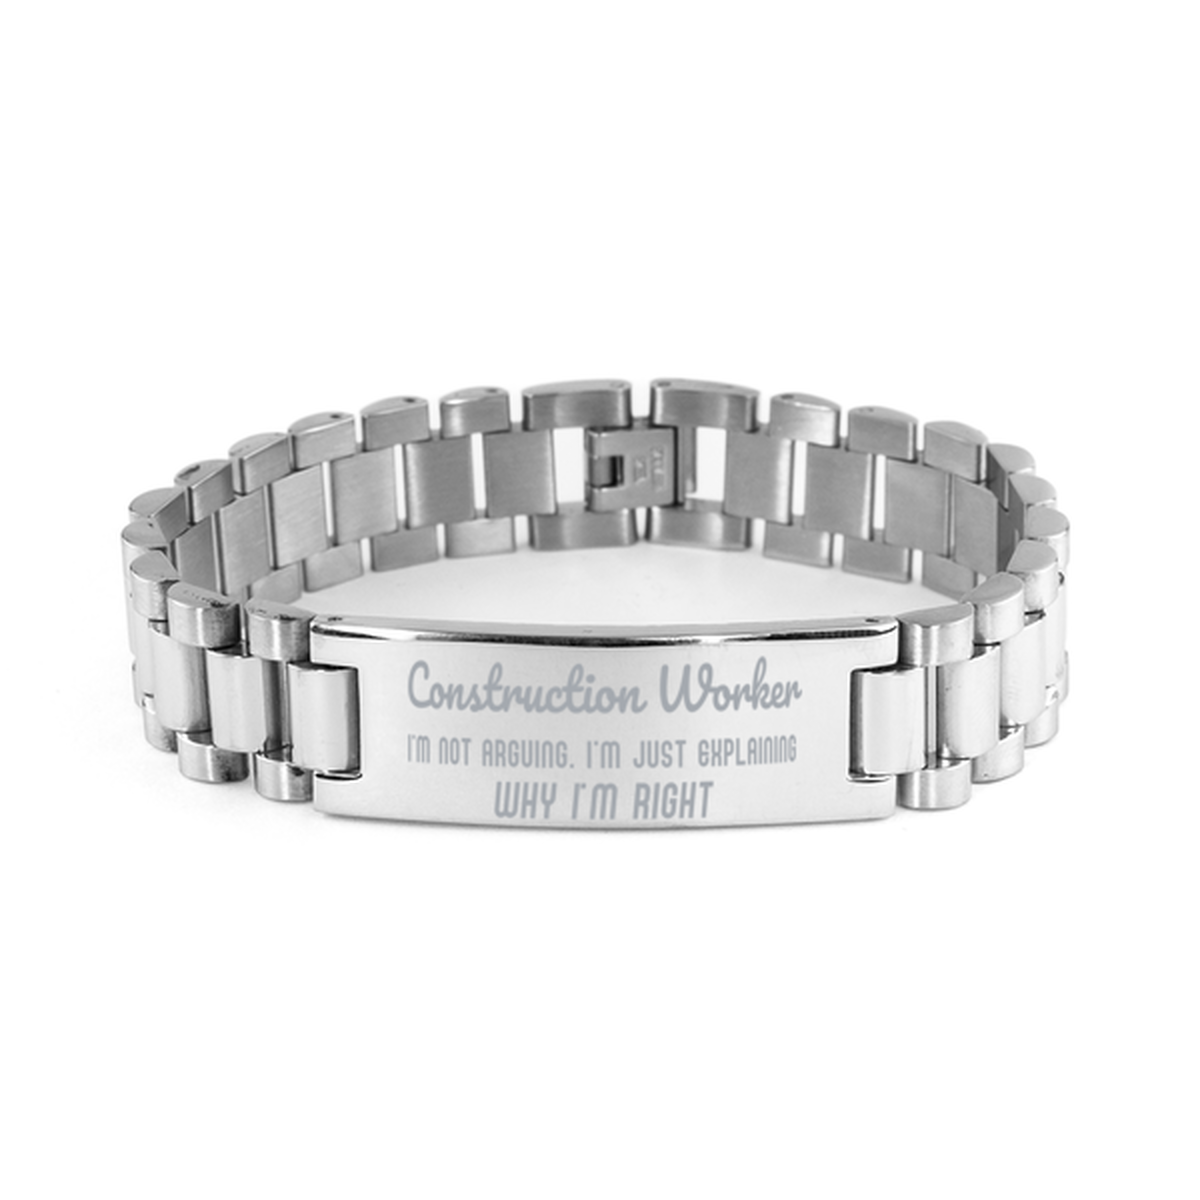 Construction Worker I'm not Arguing. I'm Just Explaining Why I'm RIGHT Ladder Stainless Steel Bracelet, Graduation Birthday Christmas Construction Worker Gifts For Construction Worker Funny Saying Quote Present for Men Women Coworker